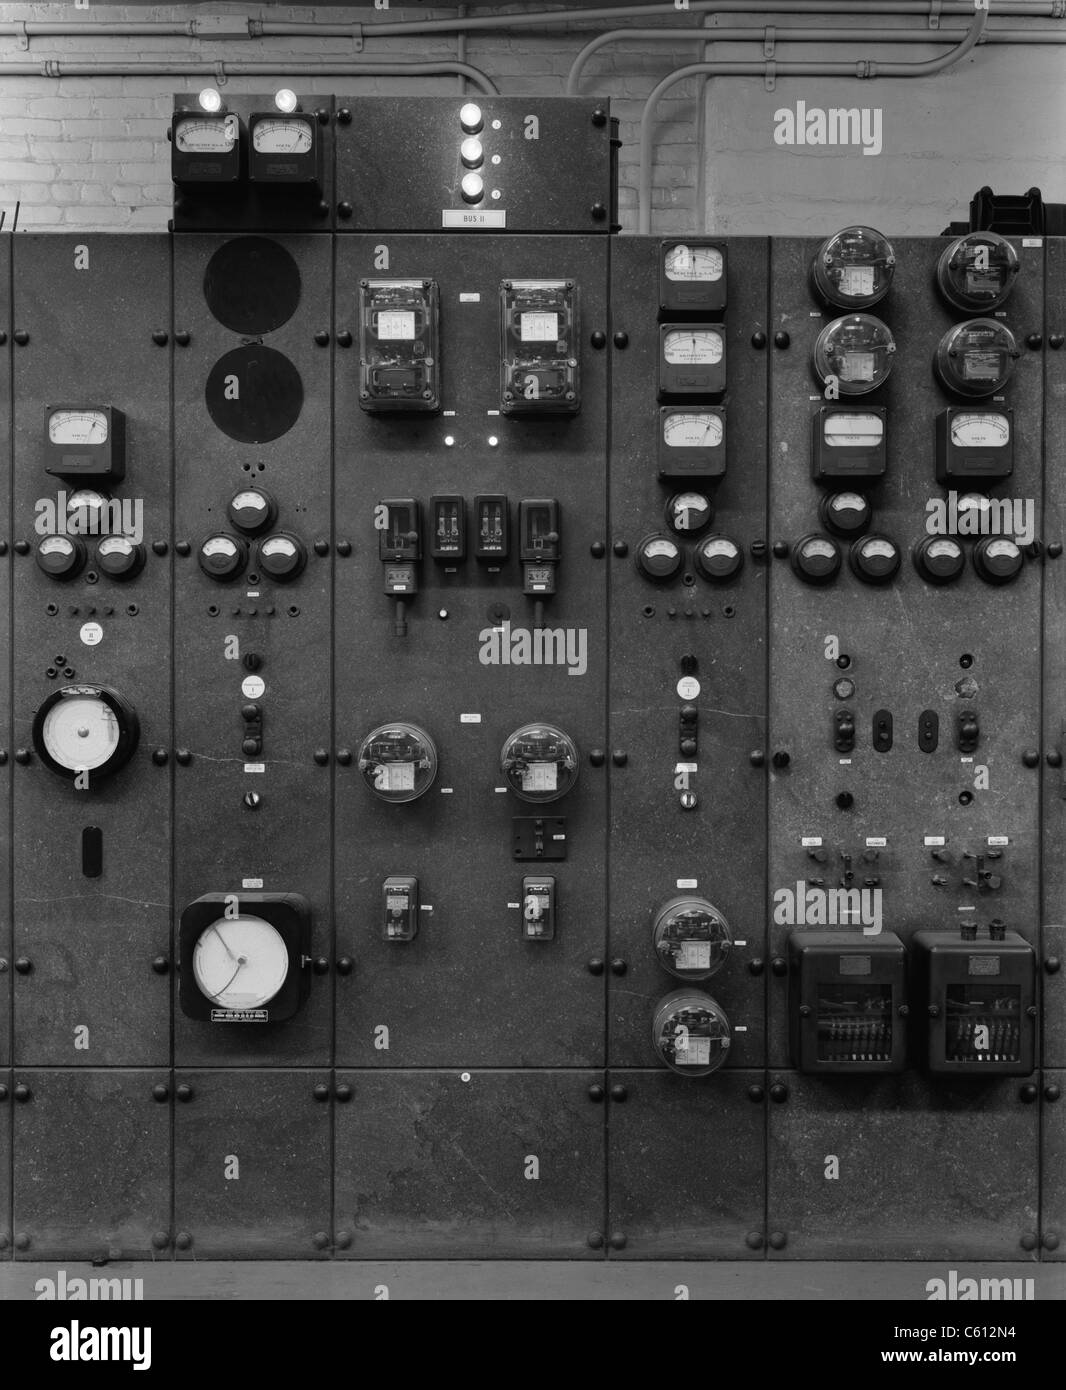 Control Panels of the Detroit Edison Substation in the early 20th century. The station's function was to step down (reduce) high voltage incoming electric current before distribution to customers and to convert alternating current into direct current for streetcar lines. Ca. 1920. Stock Photo